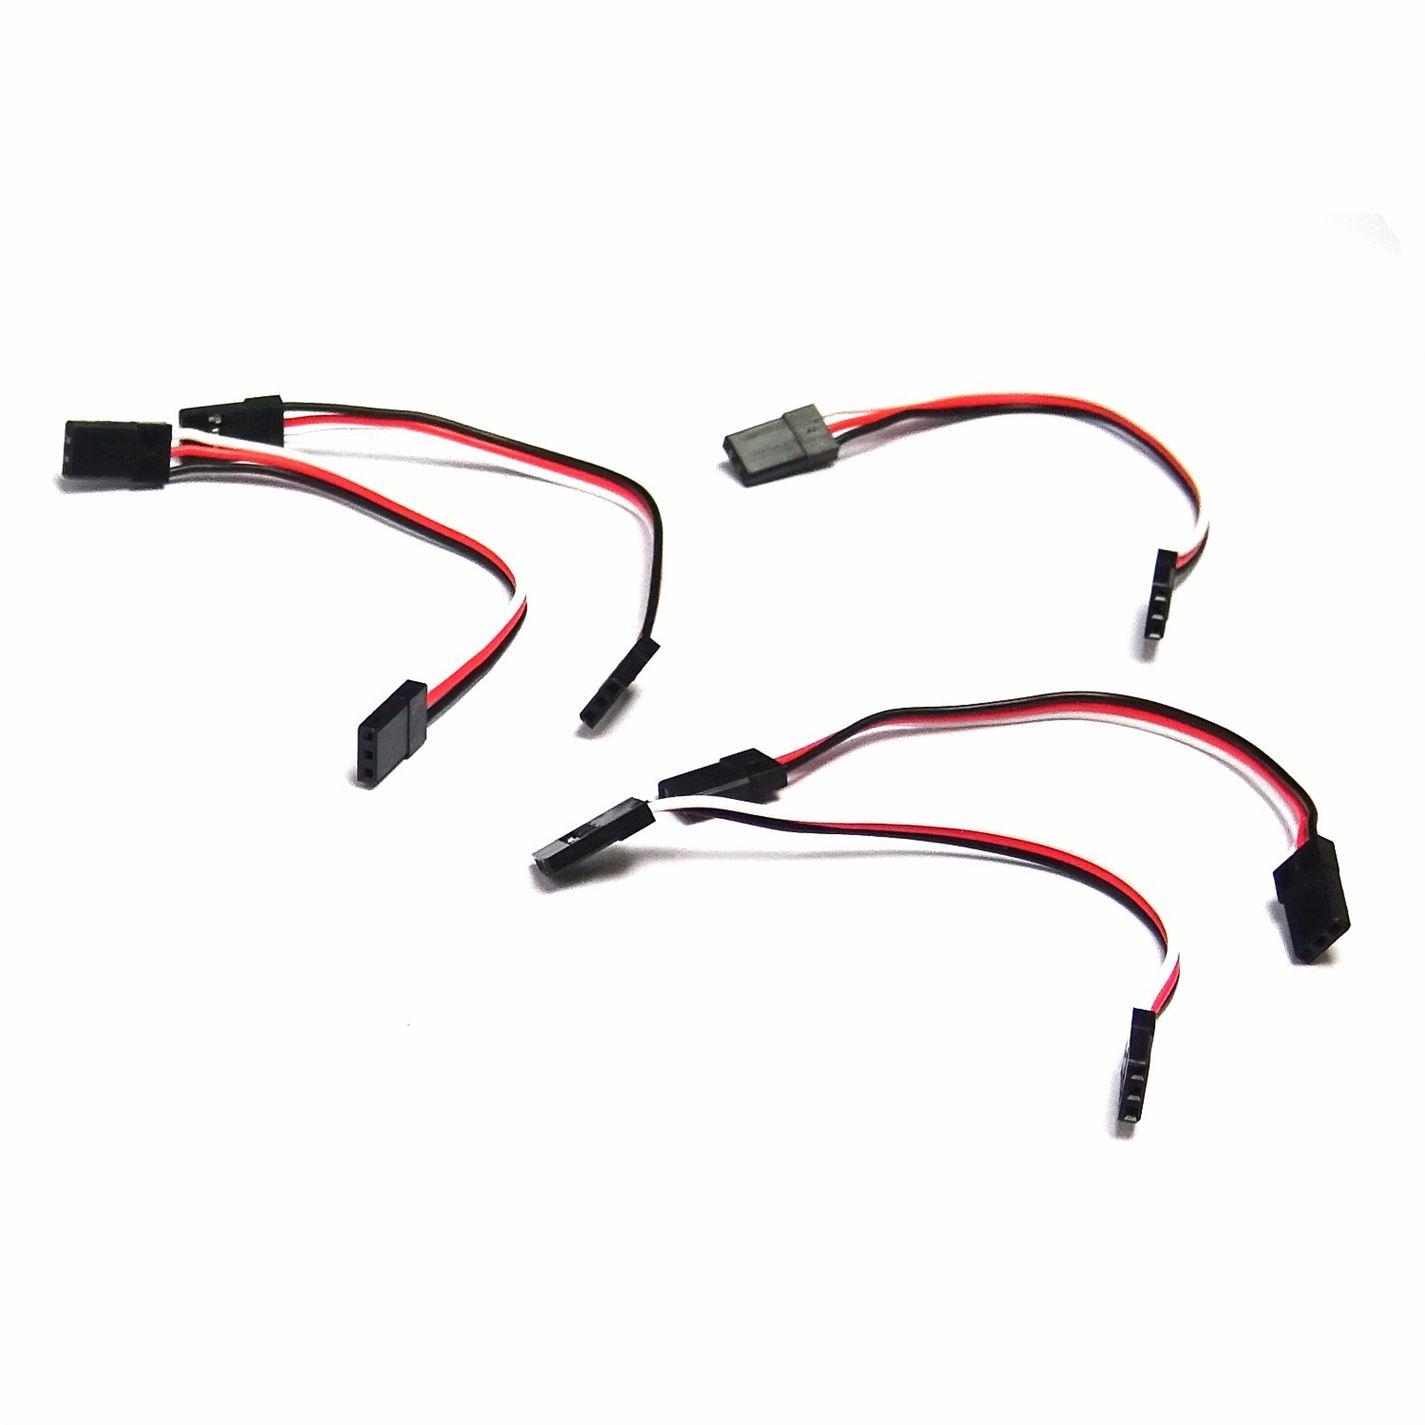 5x 100mm Servo Extension Lead Wire Cable MALE TO MALE KK MK MWC Flight Control - UK Seller